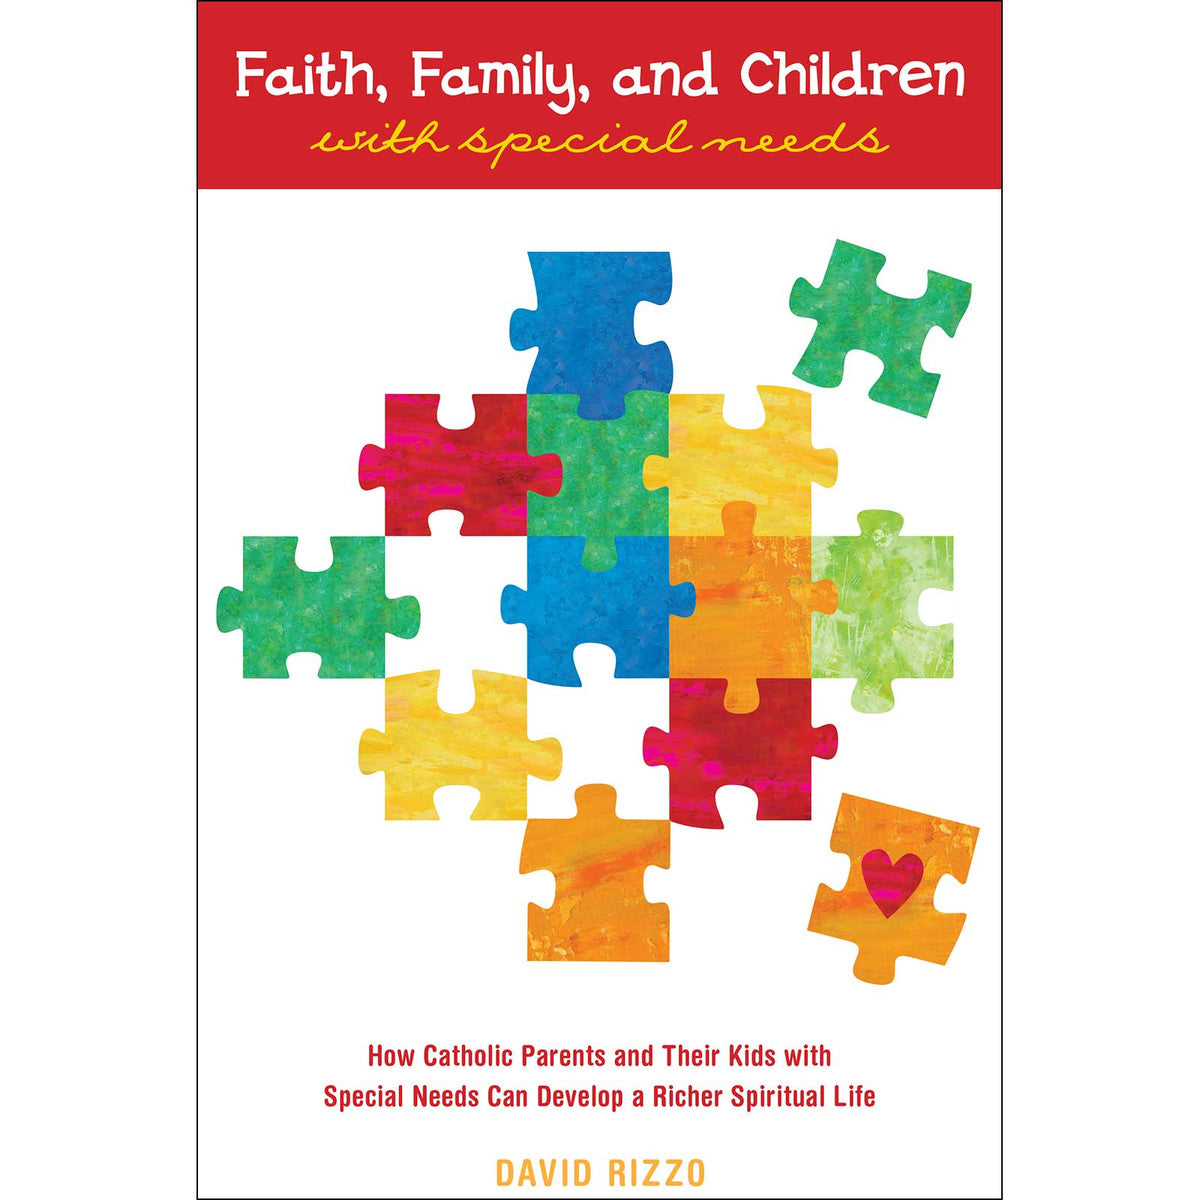 Faith, Family, and Children with Special Needs: How Catholic Parents and Their Kids with Special Needs Can Develop a Richer Spiritual Life